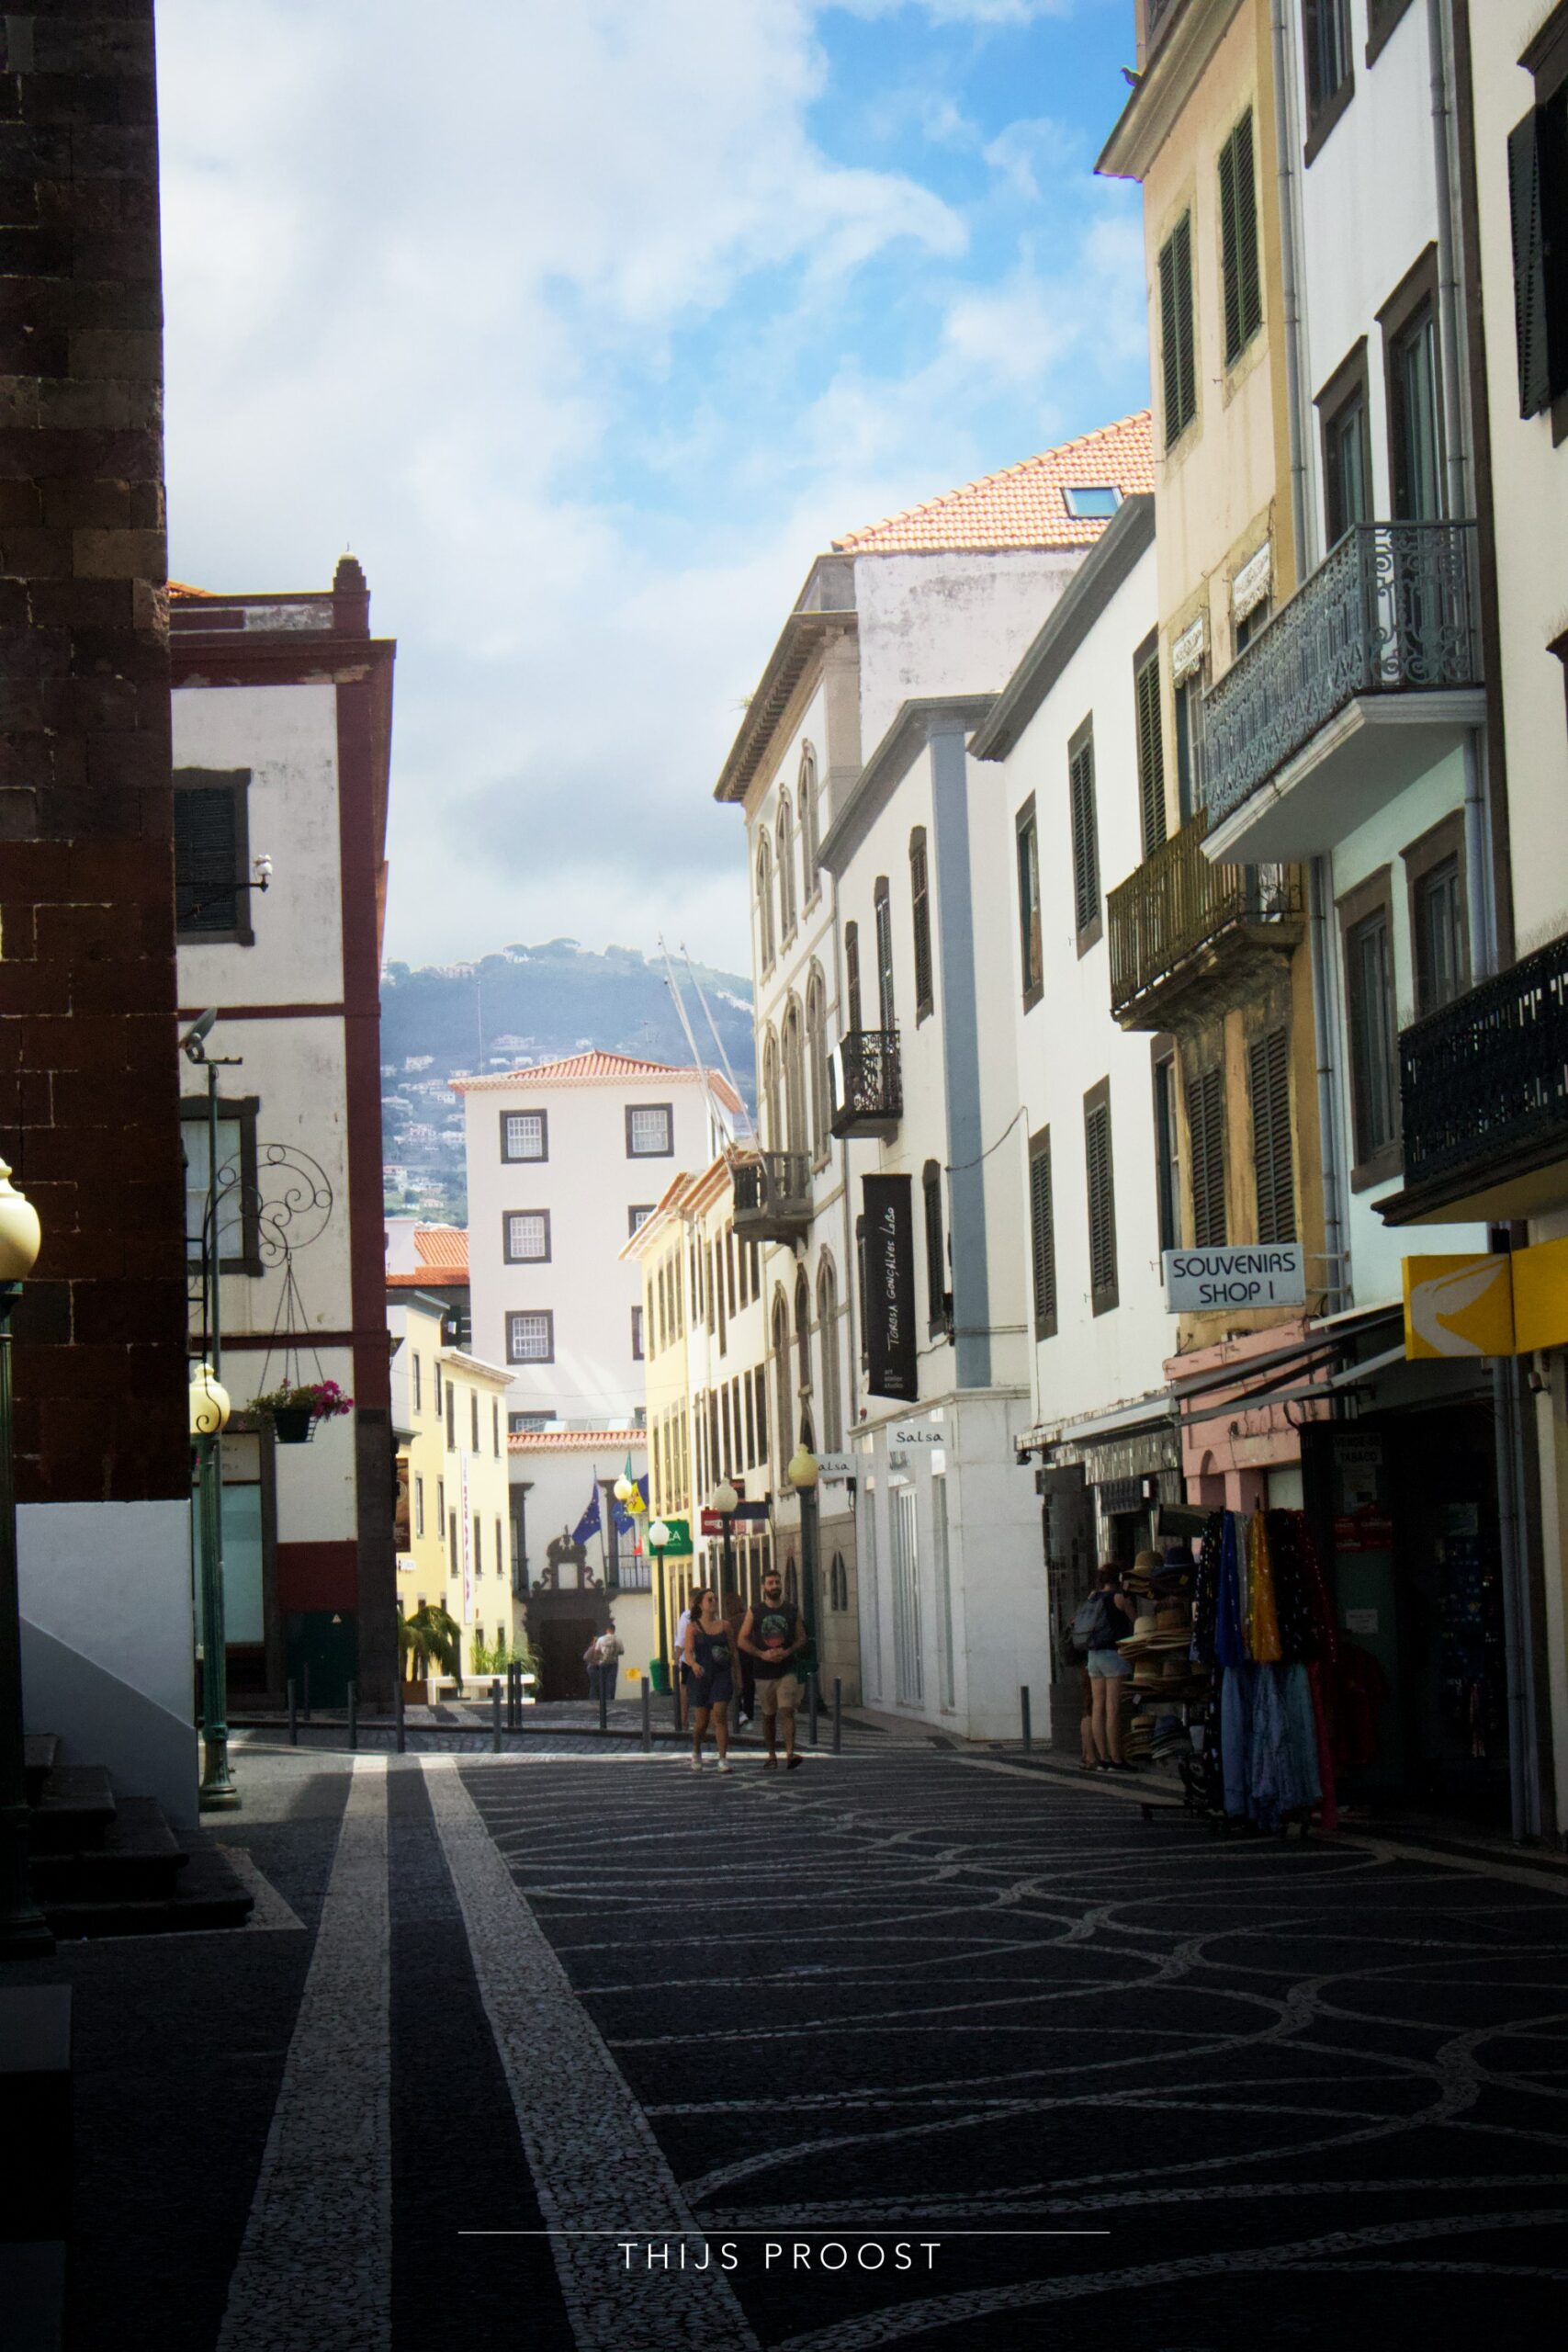 View of a street in Funchal Madeira. The houses on the right are in sunlight while the street remains in shadow. In the distance you see a hill and a cloudy sky. A the left you see a part of a church.